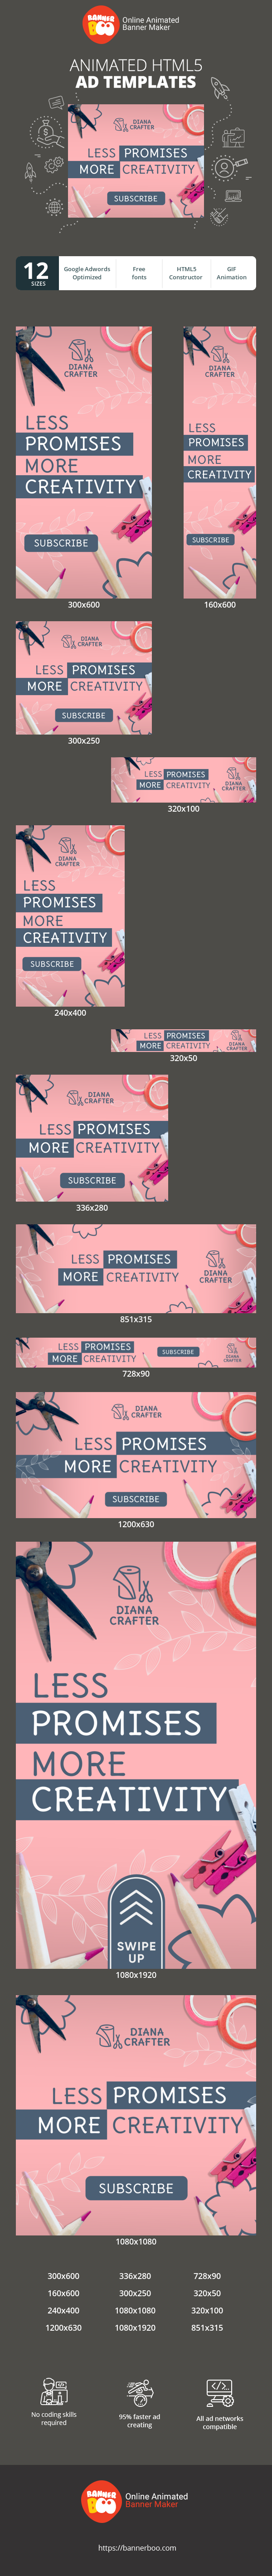 Banner ad template — Less Promises More Creativity — DIY Blog